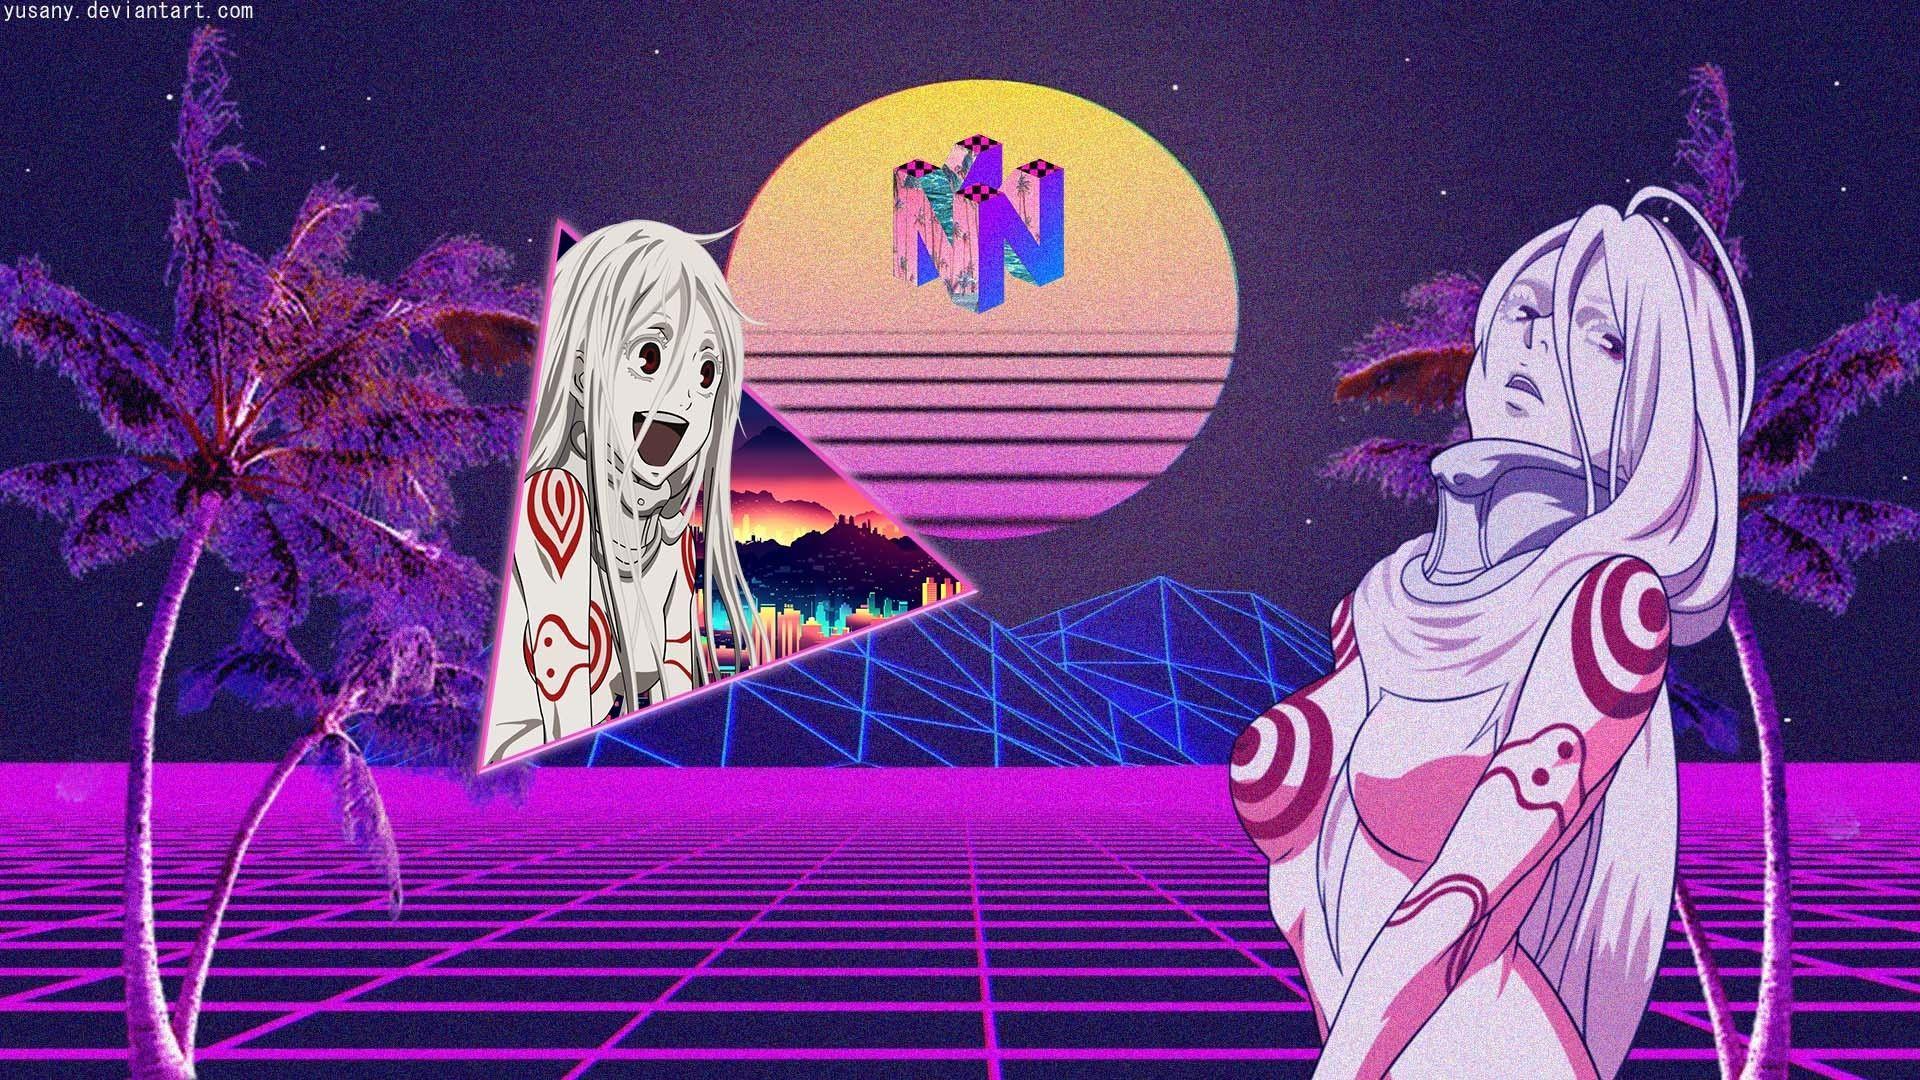 80s Anime Aesthetic Wallpapers Top Free 80s Anime Aesthetic Backgrounds Wallpaperaccess